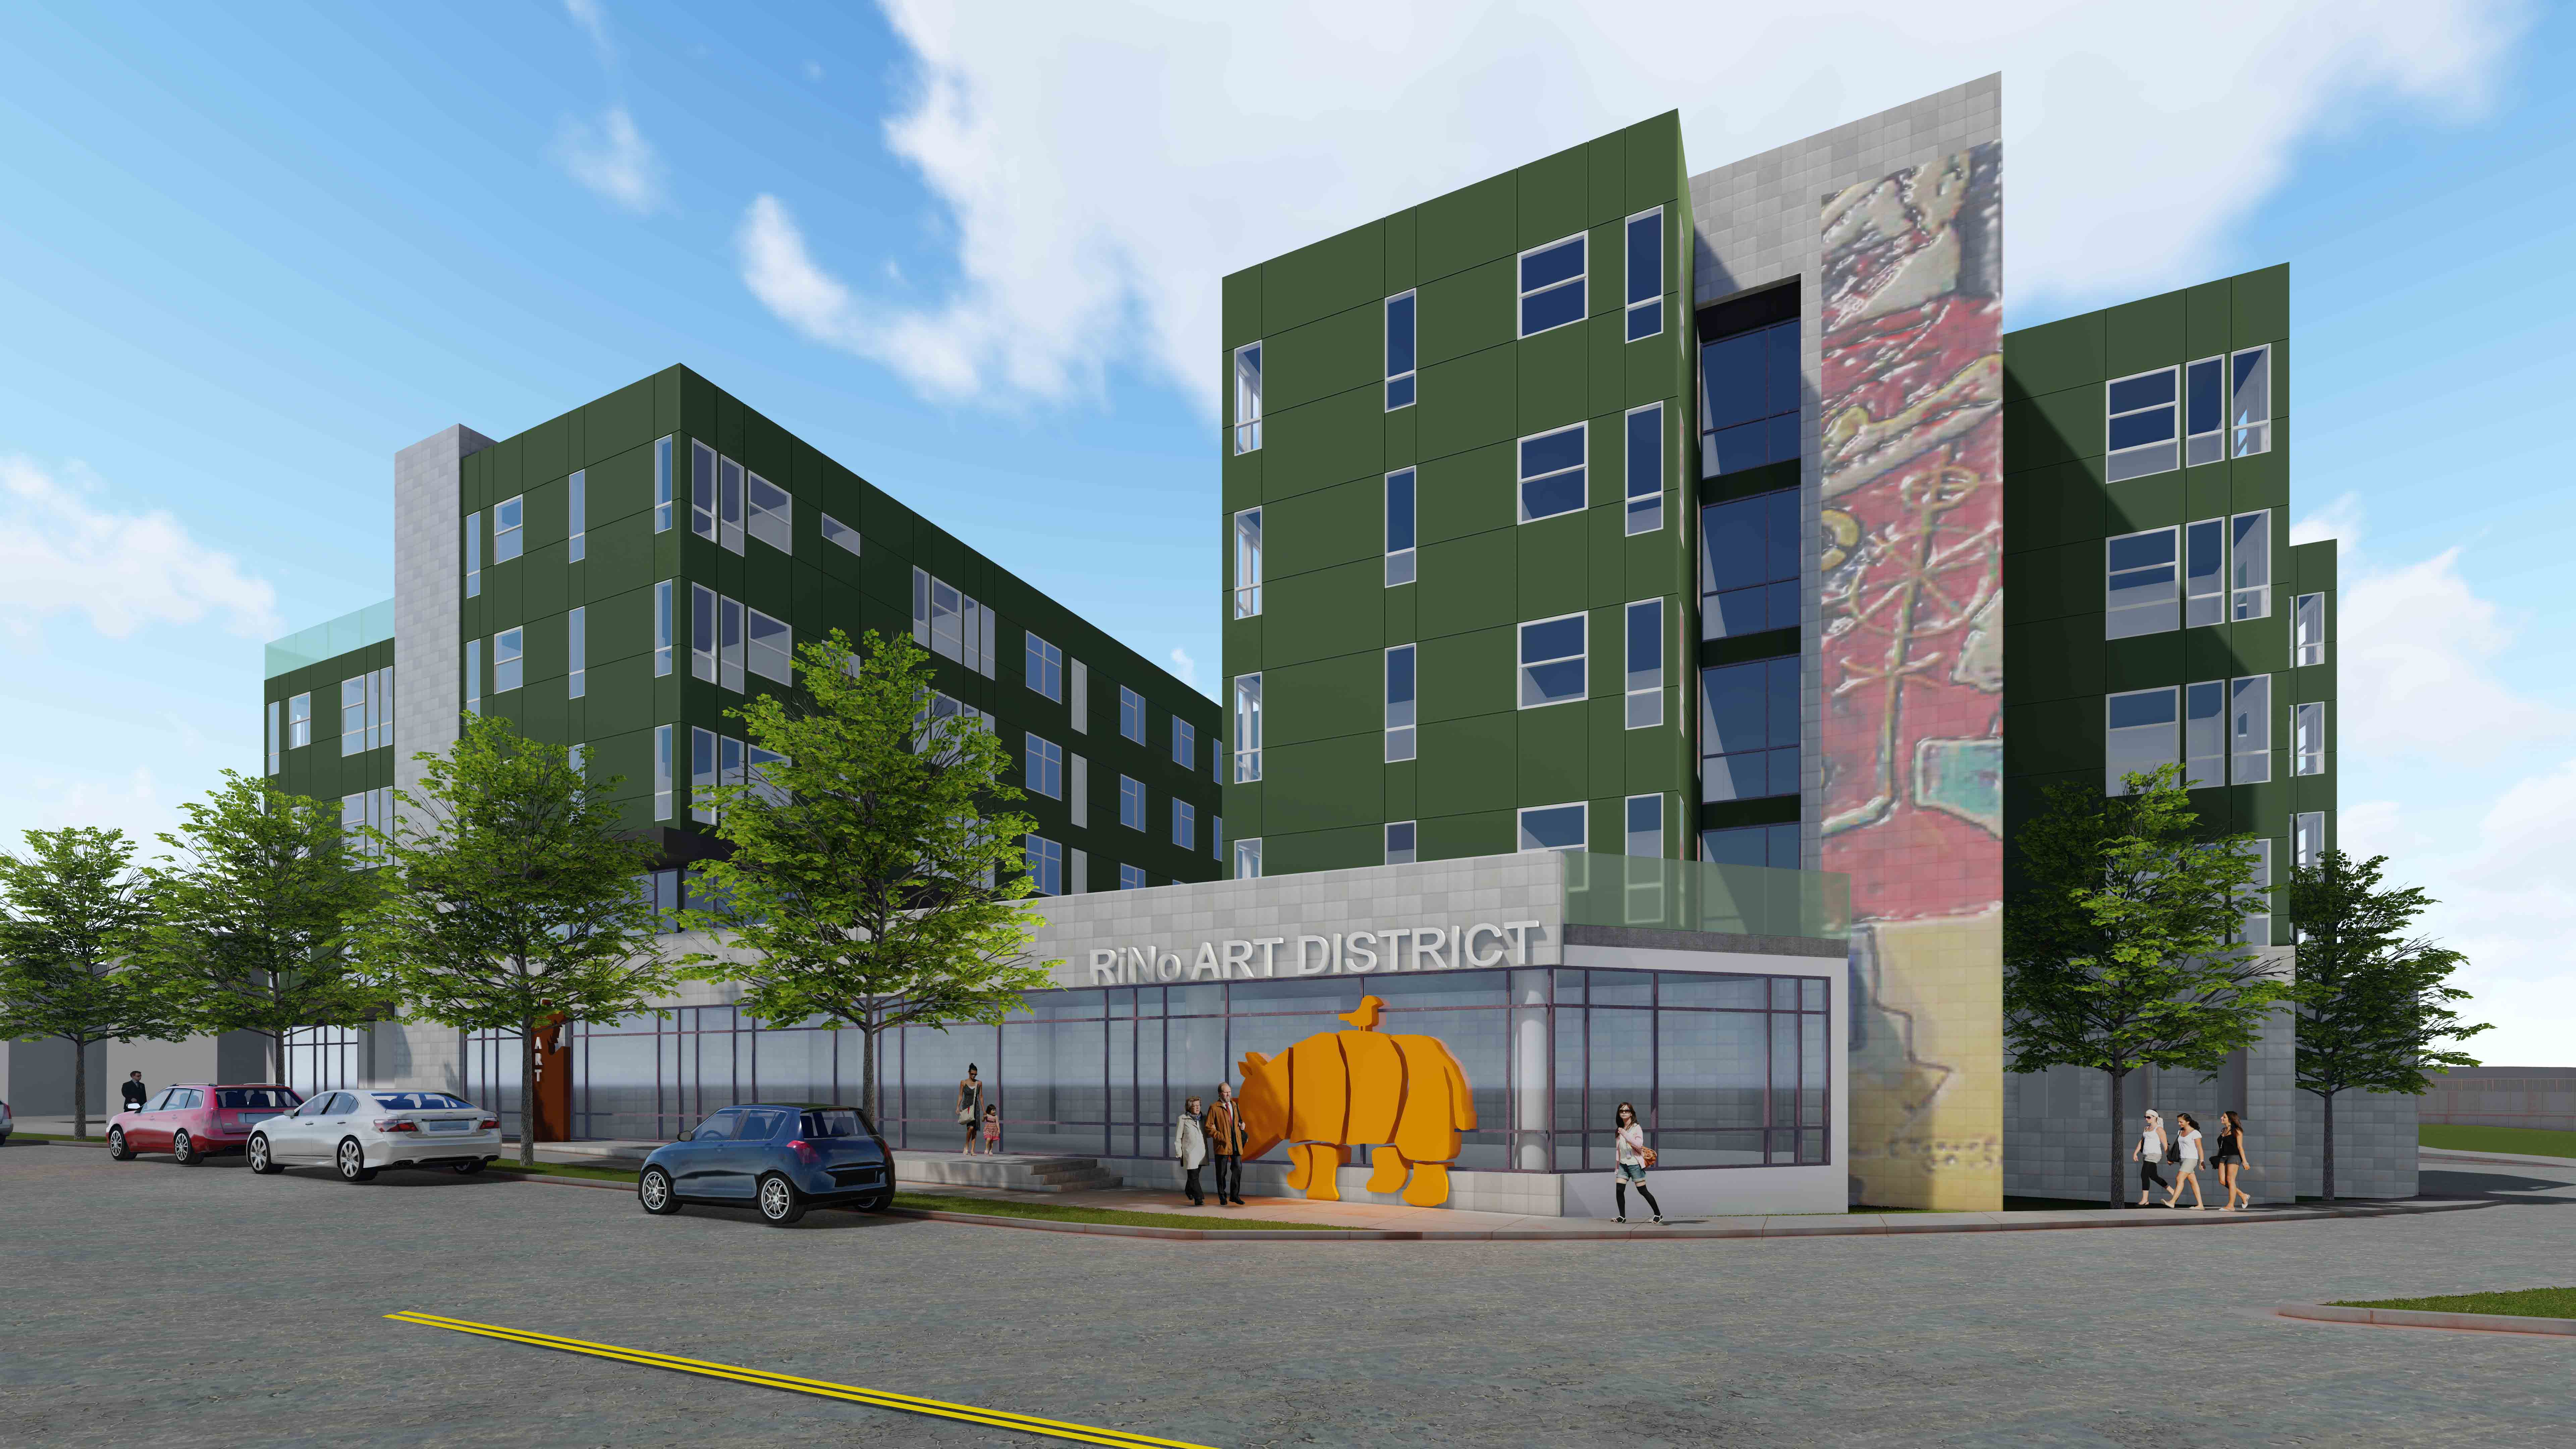 A rendering of the future Walnut Street Lofts, 65 units of affordable housing at 38th and Walnut in the RiNo neighborhood.